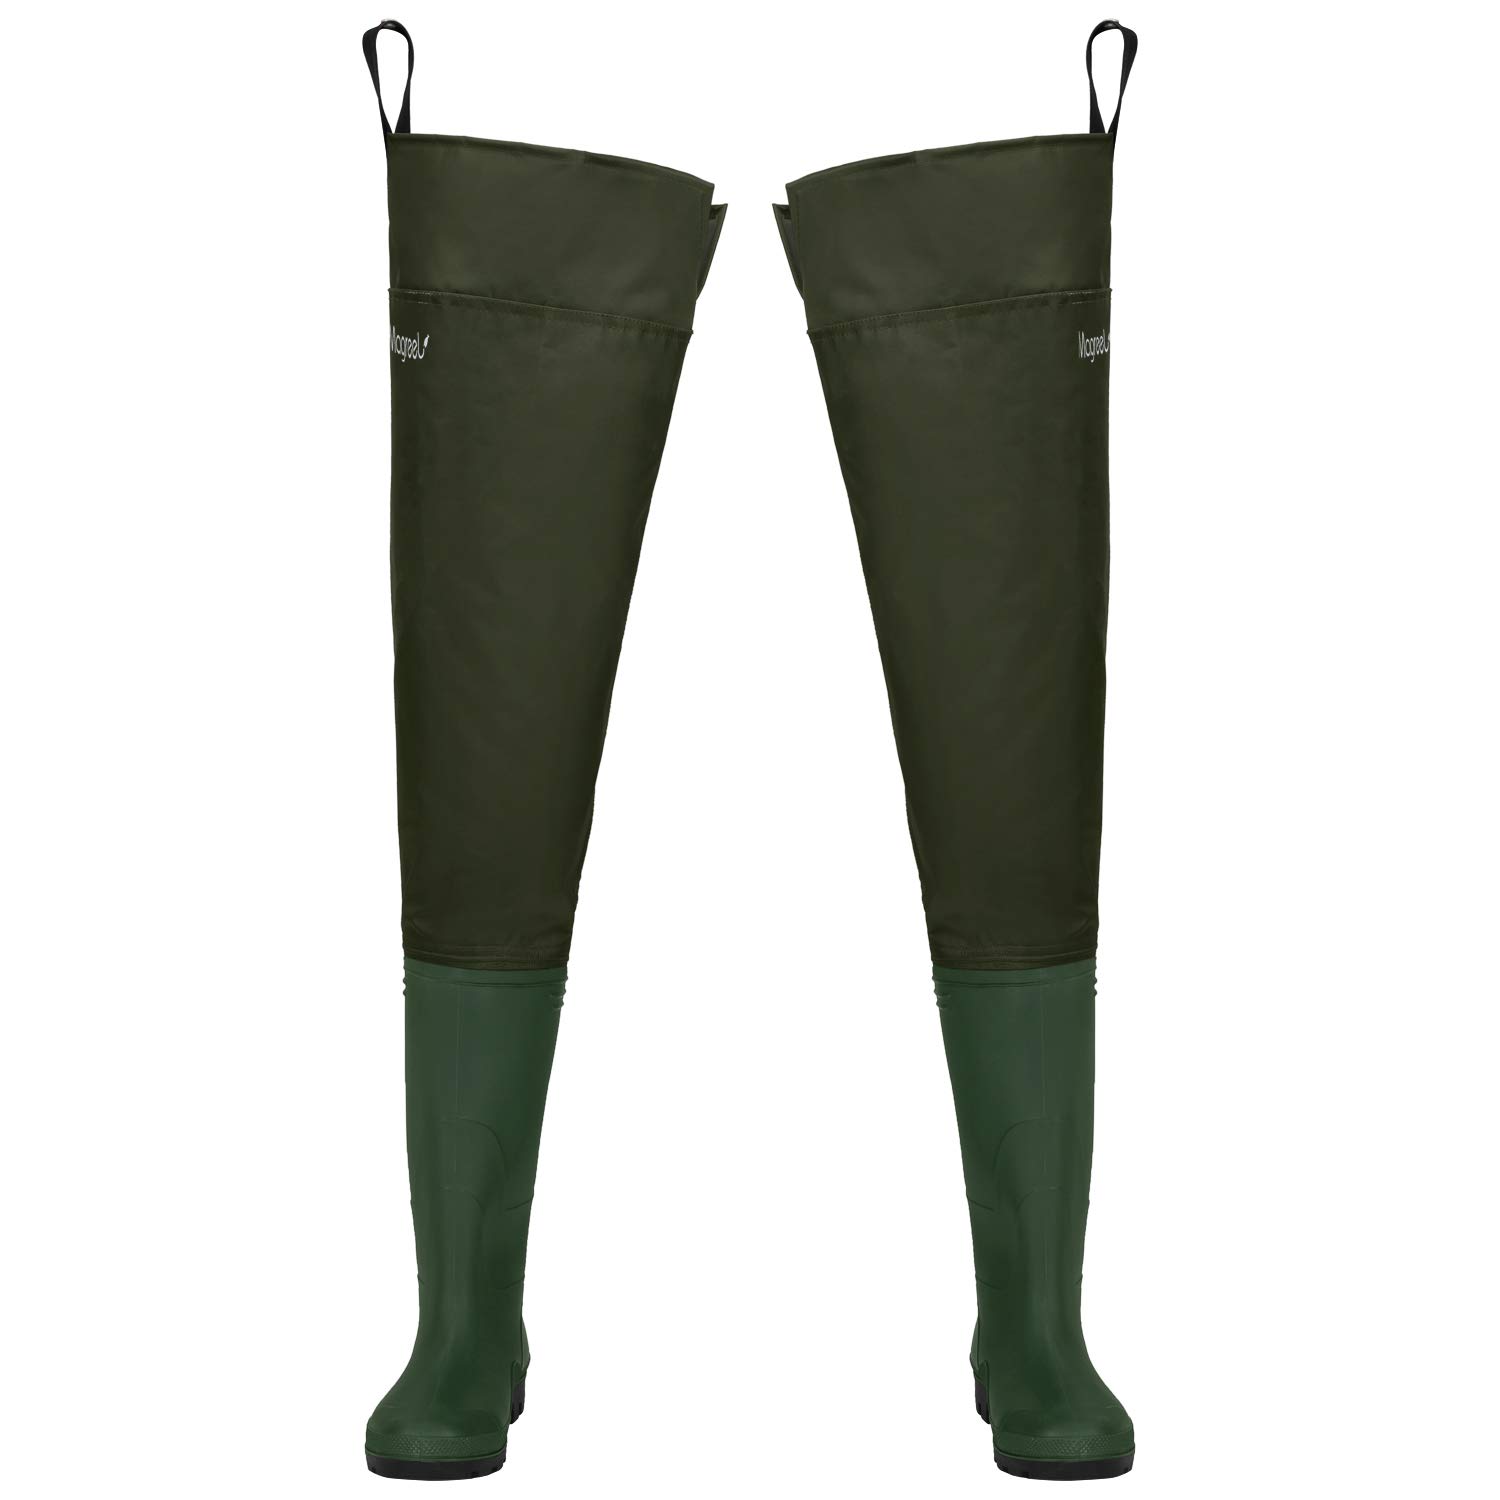 TIDEWE Hip Wader, Lightweight Hip Boot for Men and Women, 2-Ply PVC/Nylon Fishing  Hip Wader (Green and Brown) Green M9/W11